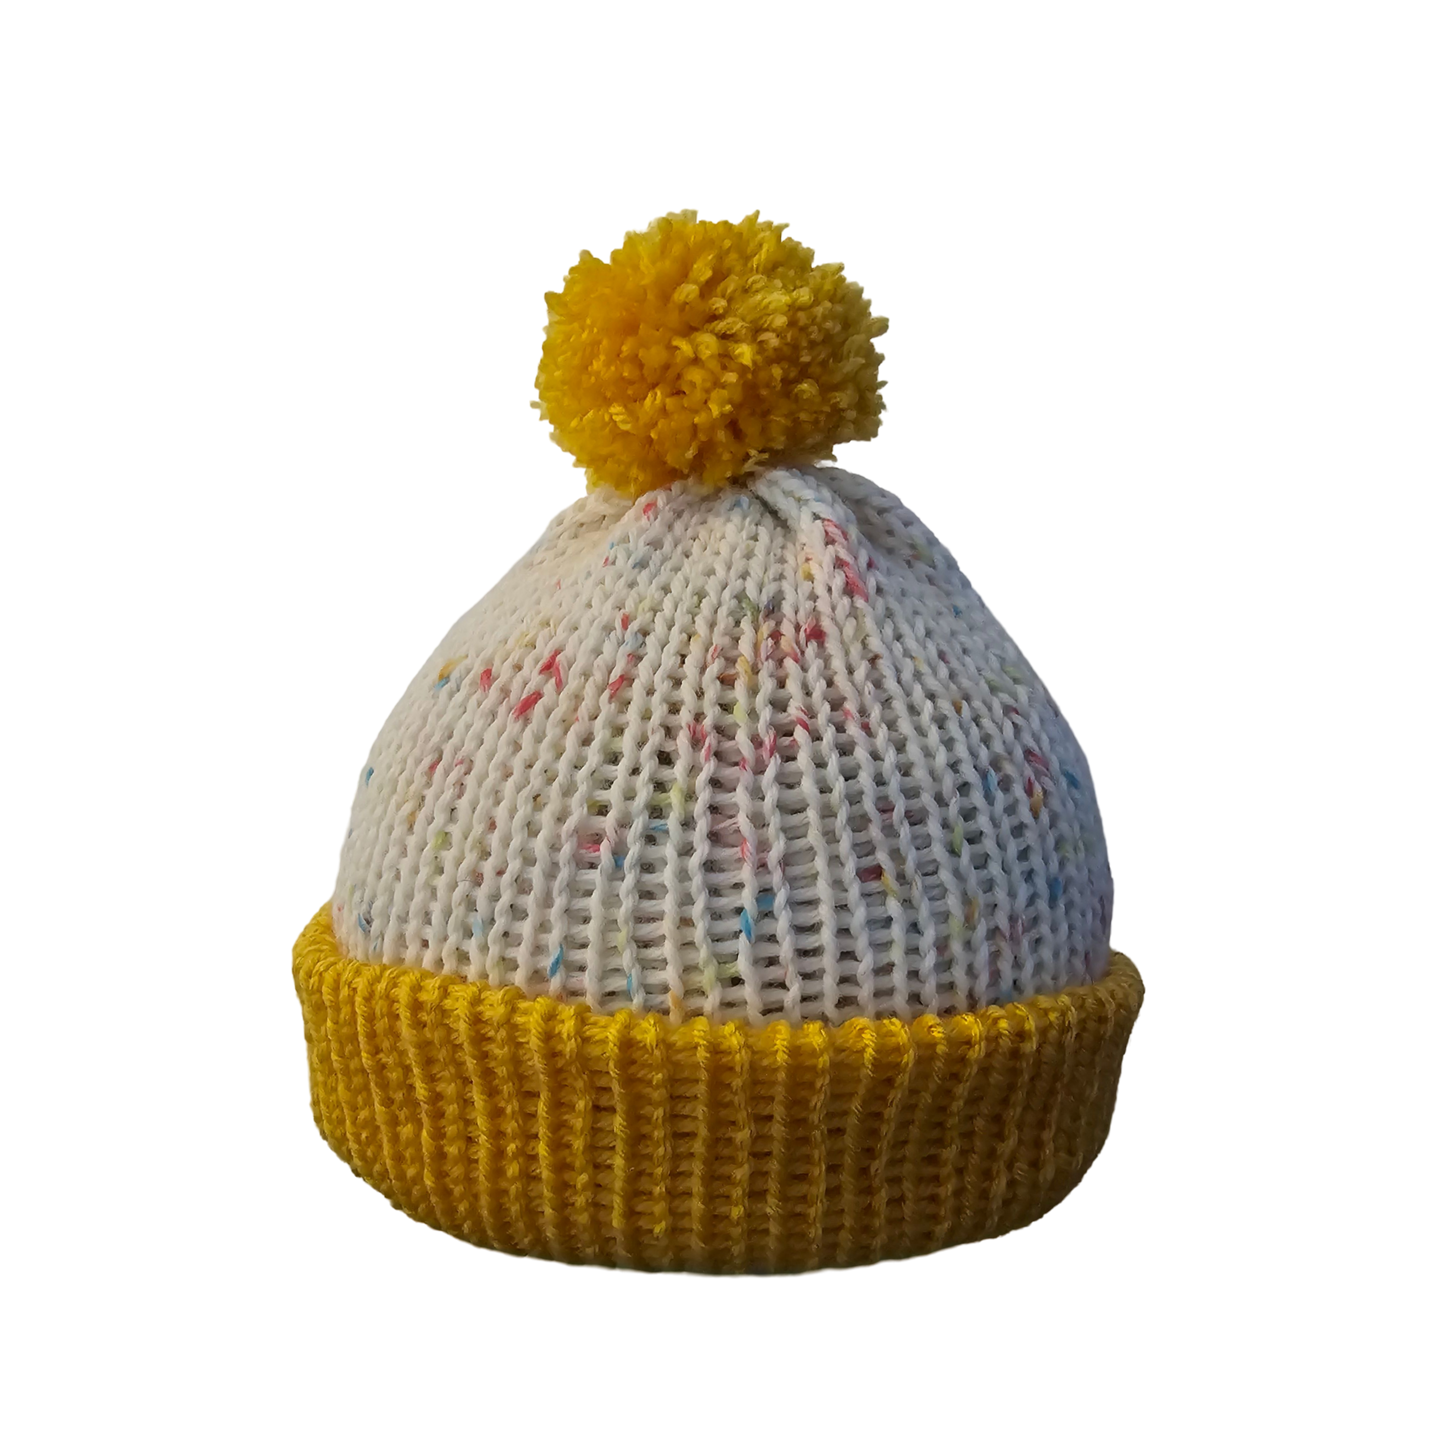 Sprinkled Yellow Kids Knitted Beanie